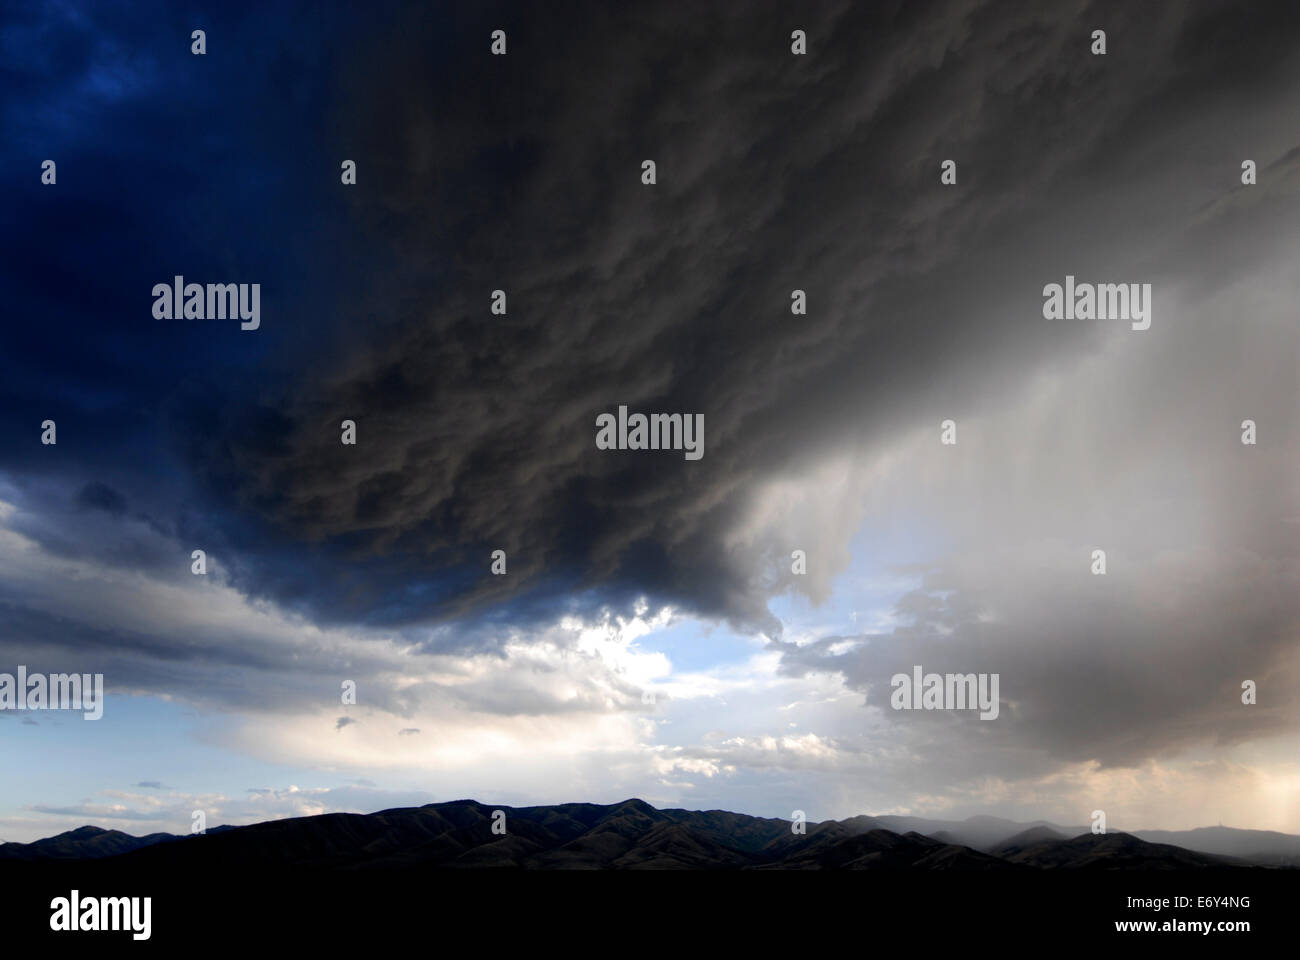 Landscape of storm clouds passing over mountain range Stock Photo